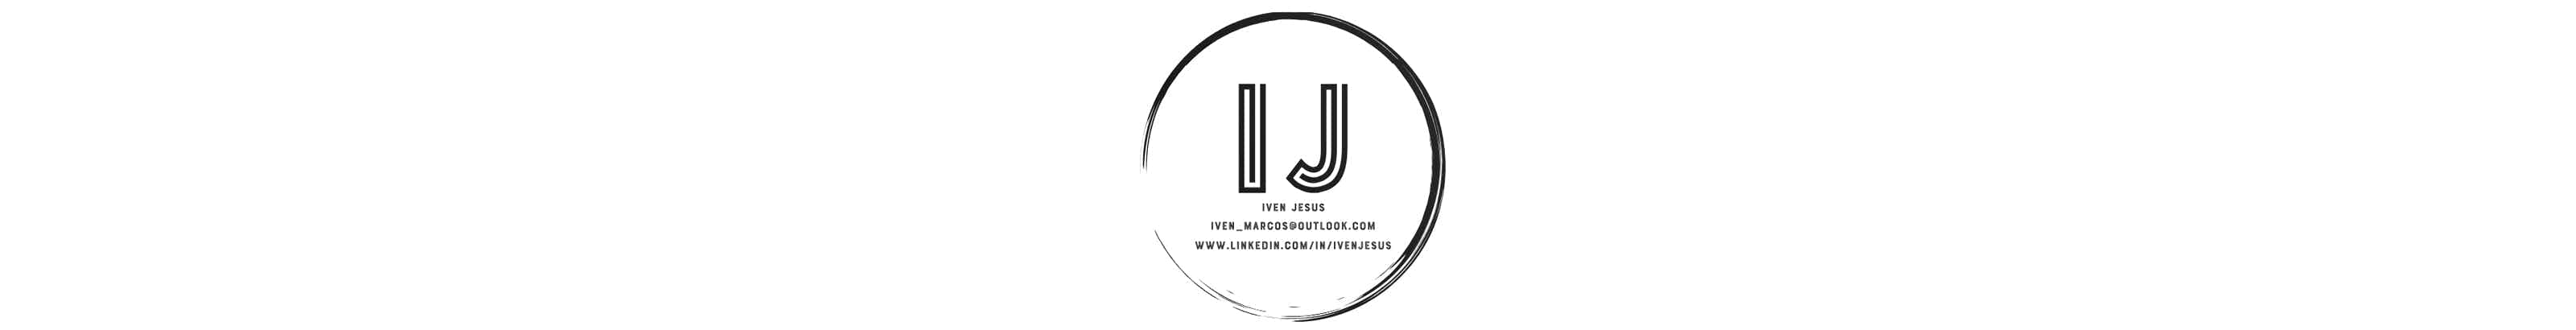 Iven Jesus's cover image